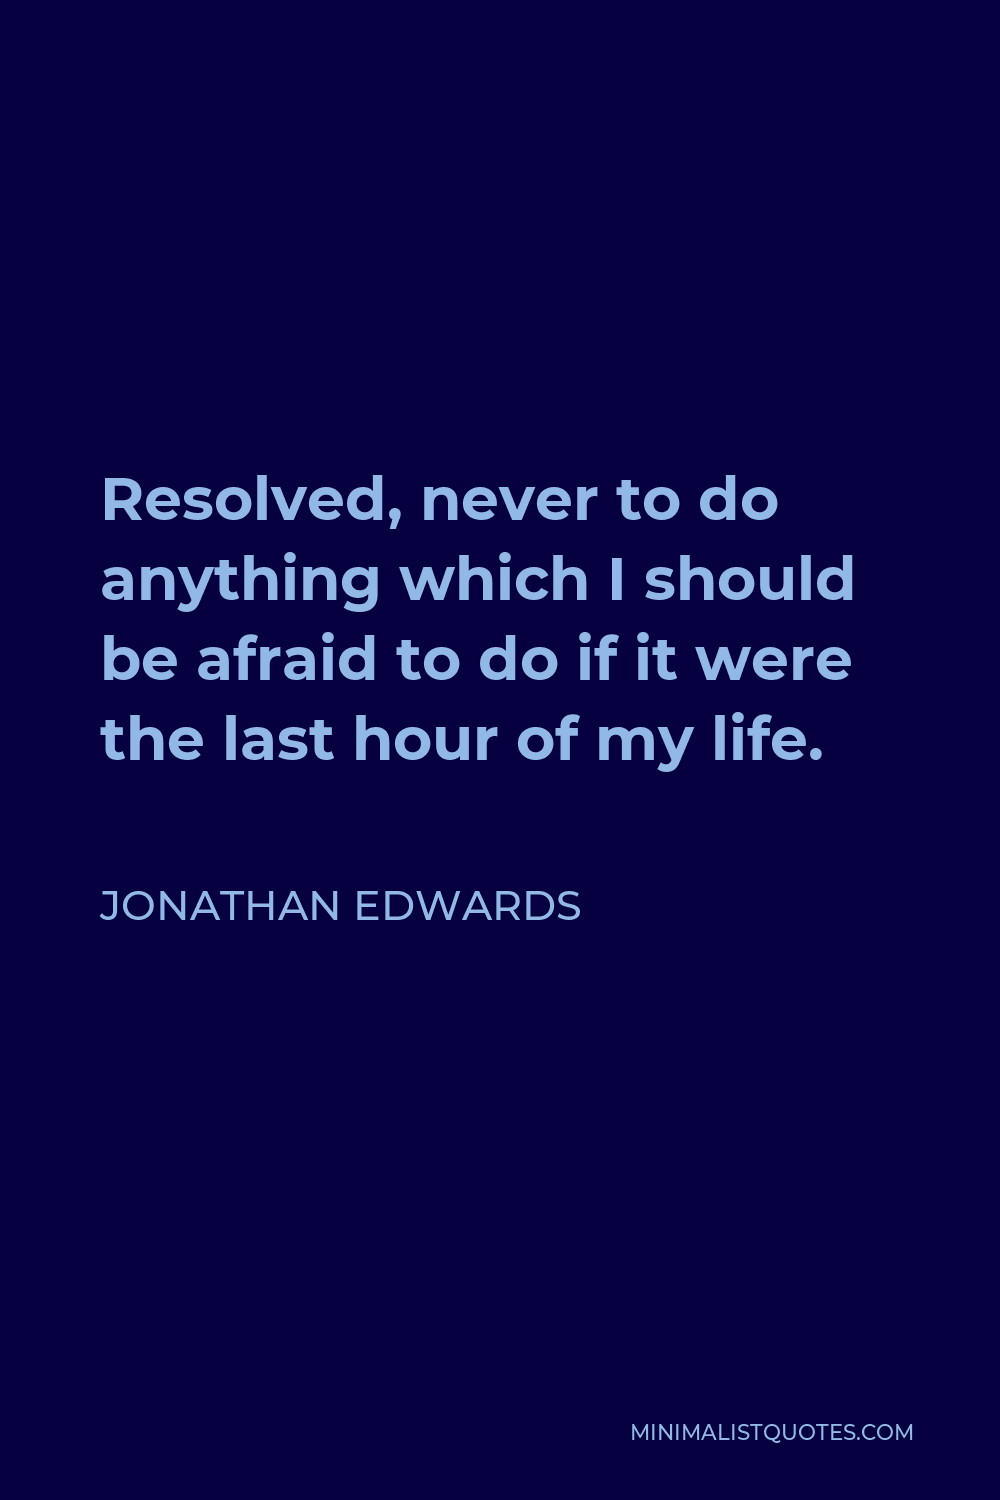 Jonathan Edwards Quote - Resolved, never to do anything which I should be afraid to do if it were the last hour of my life.